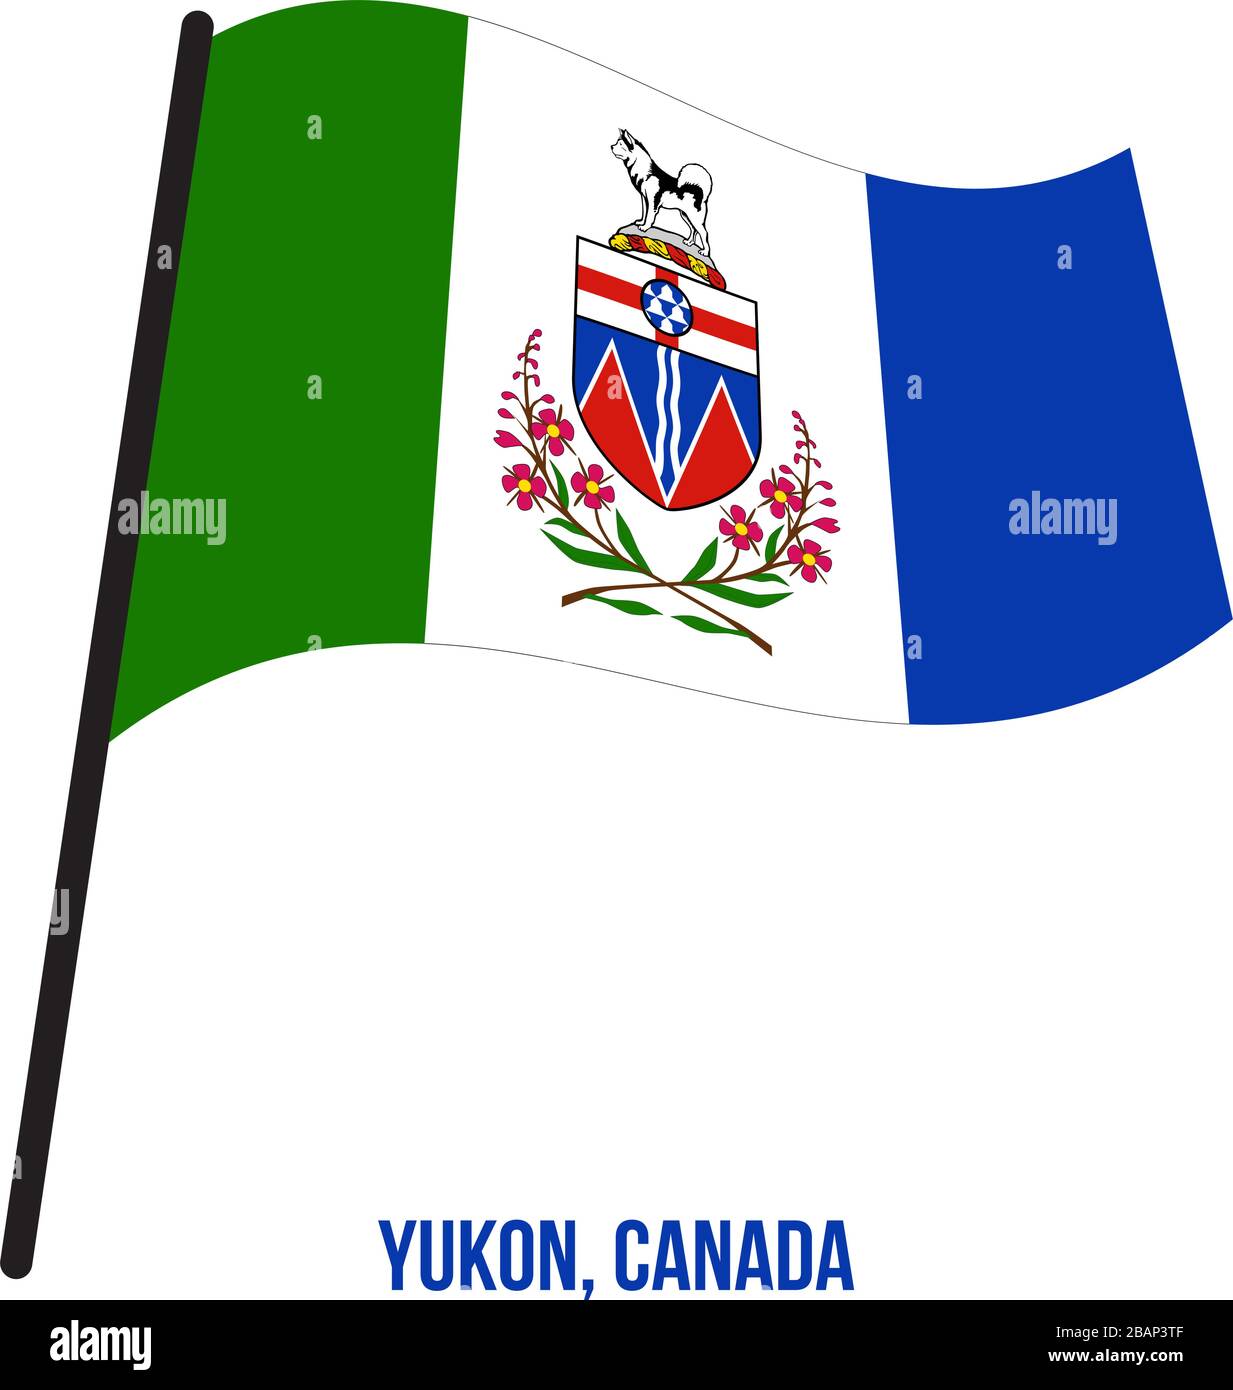 Yukon Flag Waving Vector Illustration on White Background. Territory Flag of Canada. Correct Size, Proportion and Colors. Stock Vector